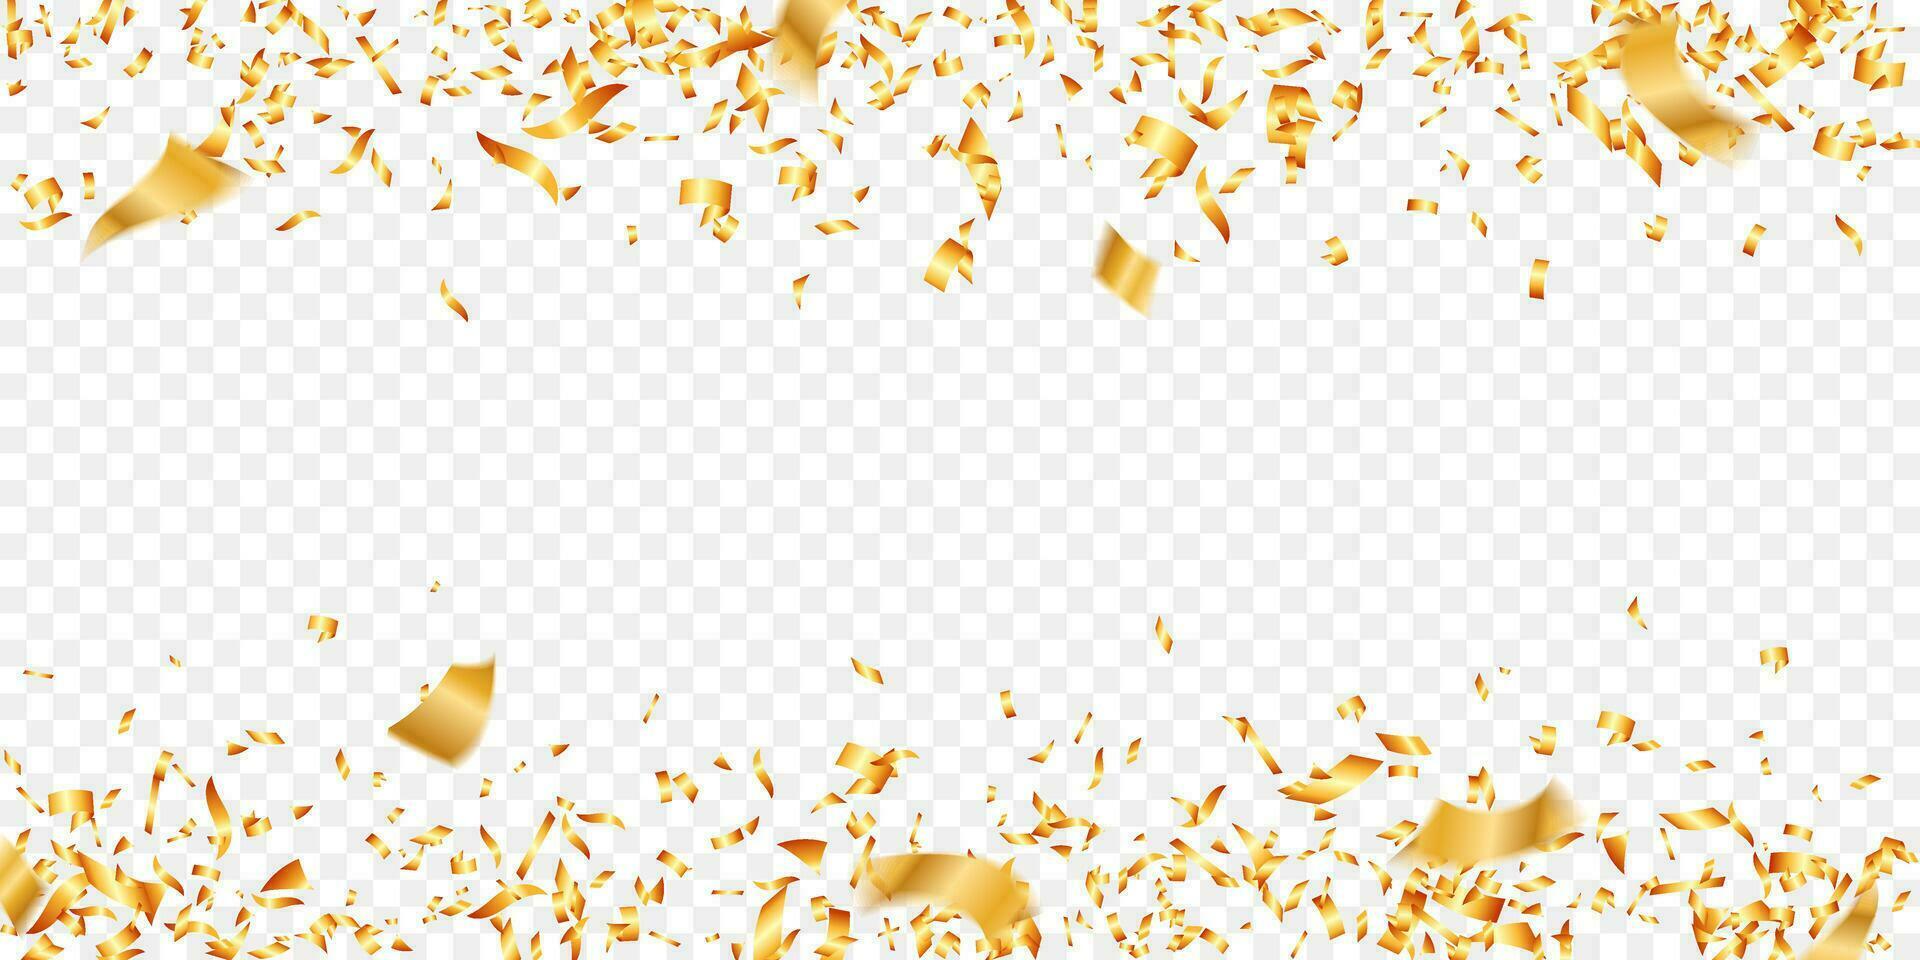 gold glittering confetti background for holiday, birthday, party and celebration vector